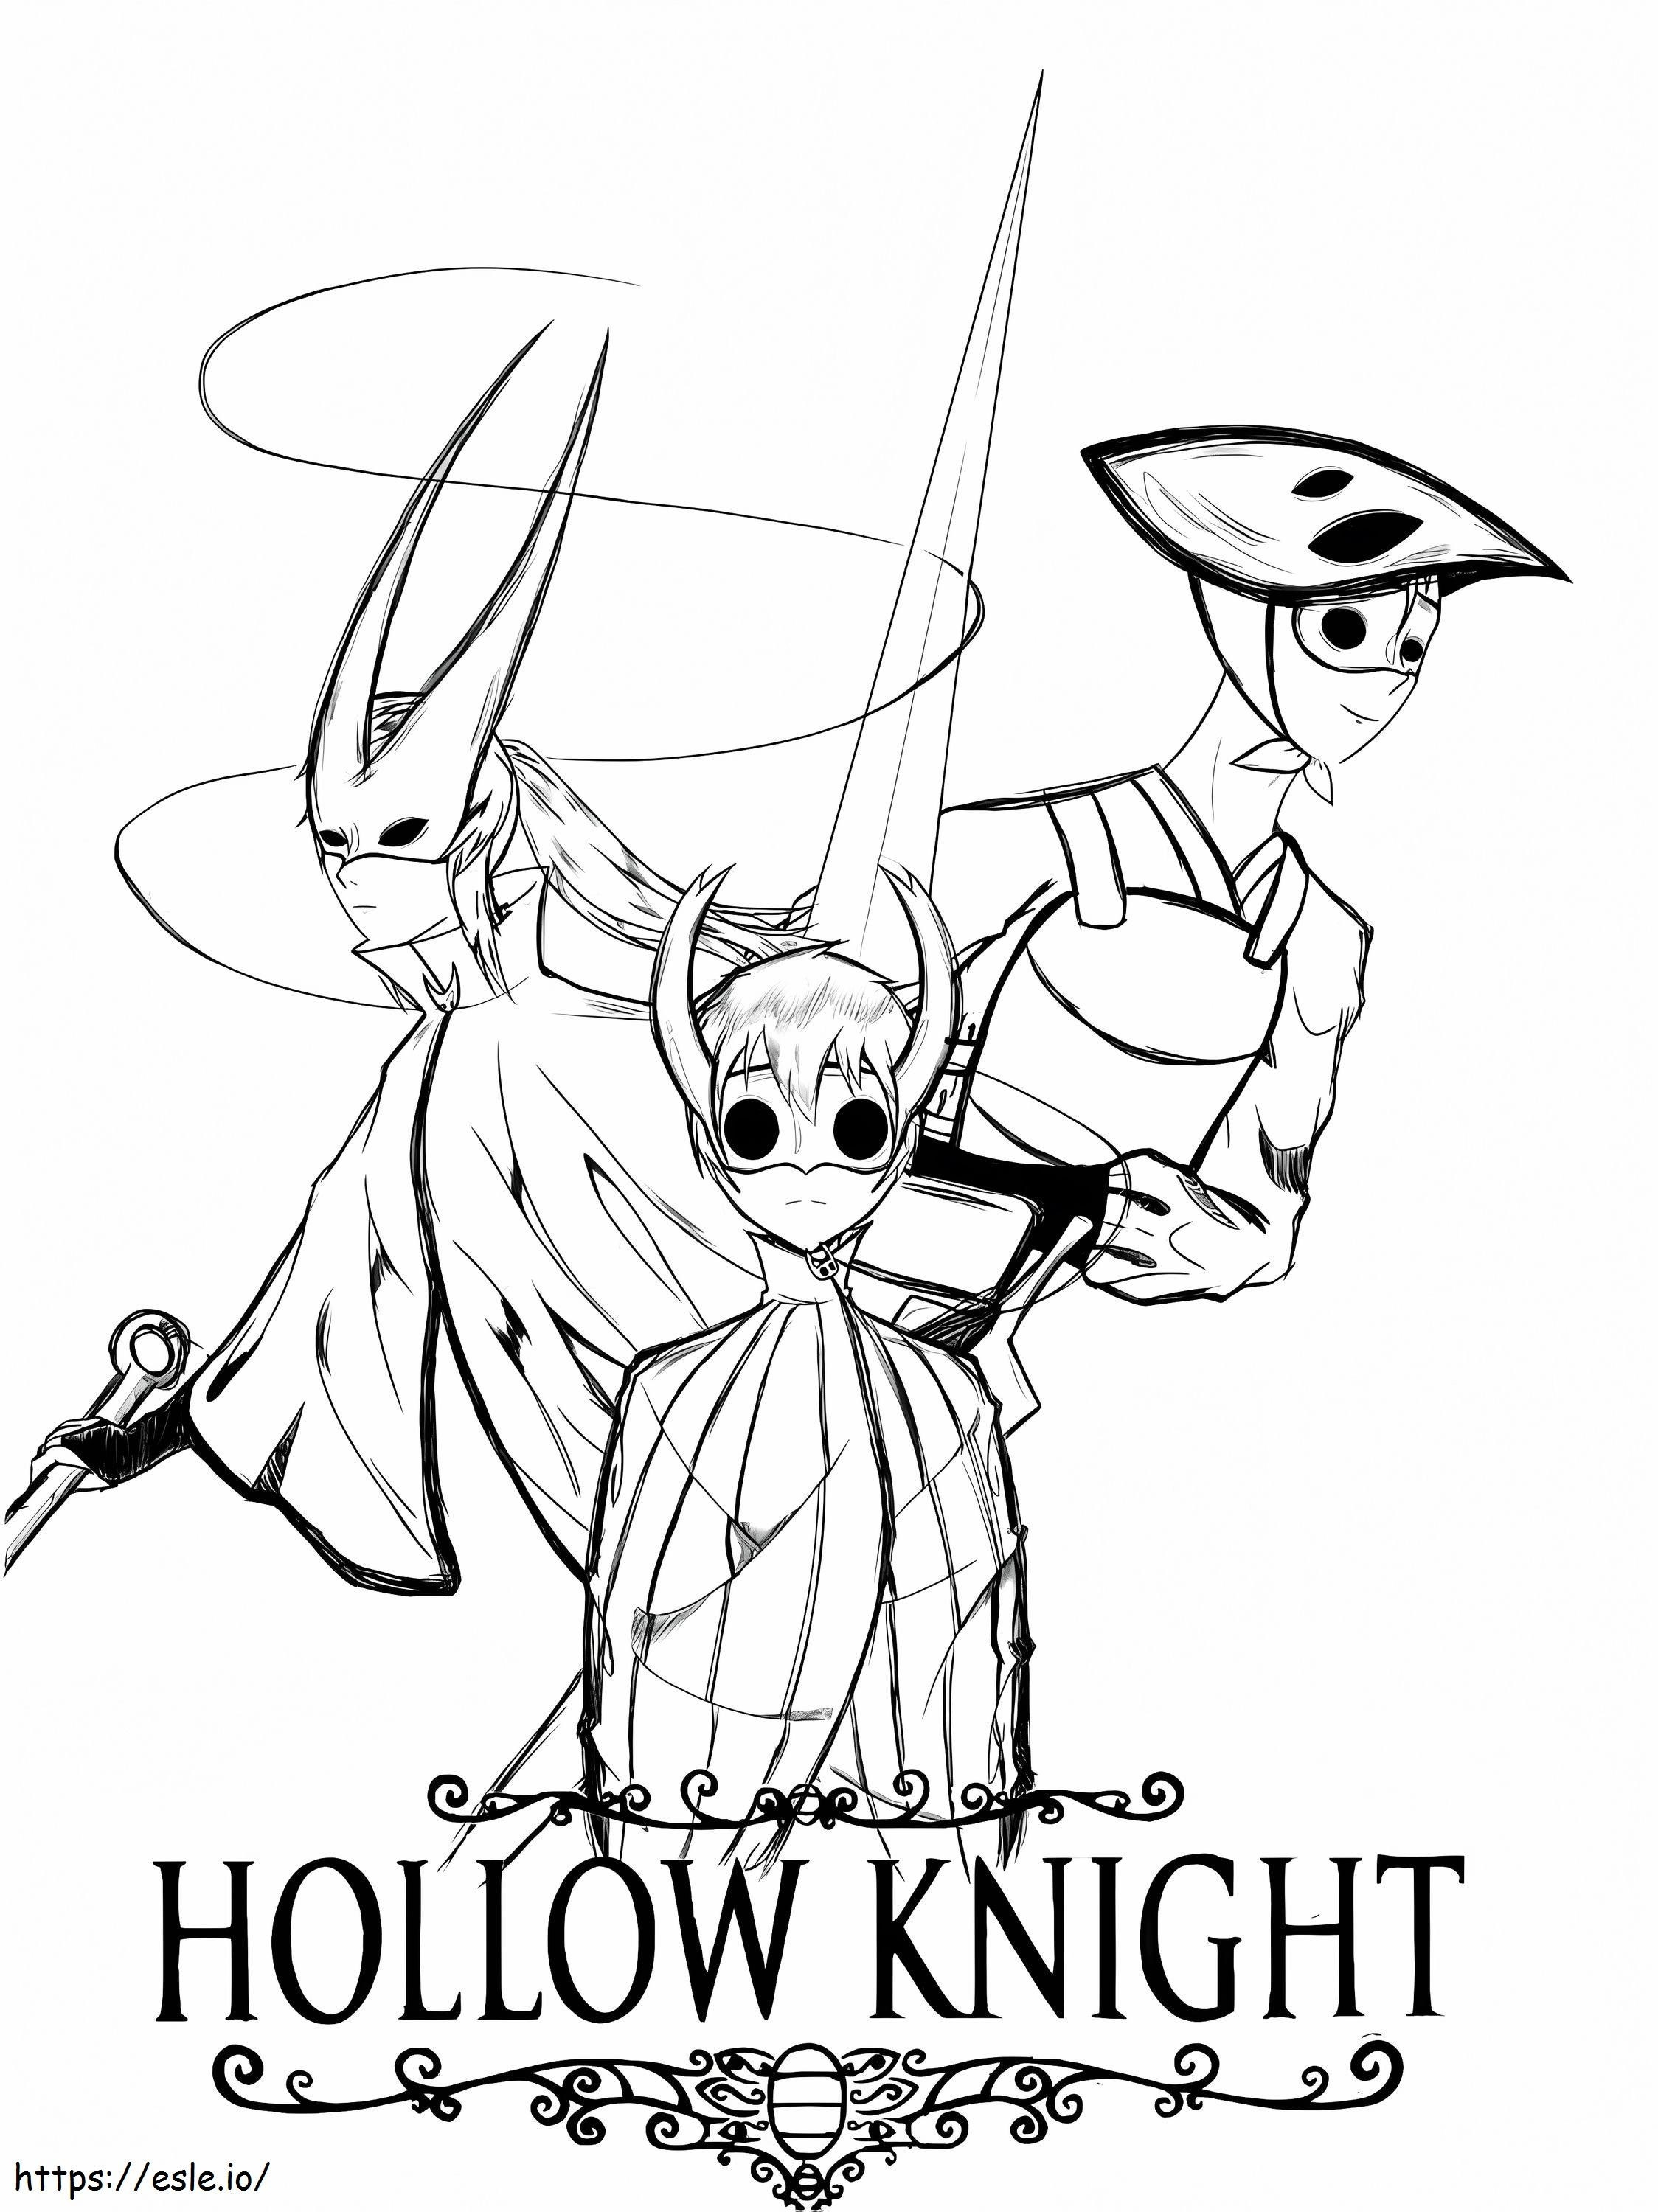 Hollow Knight Sketch coloring page